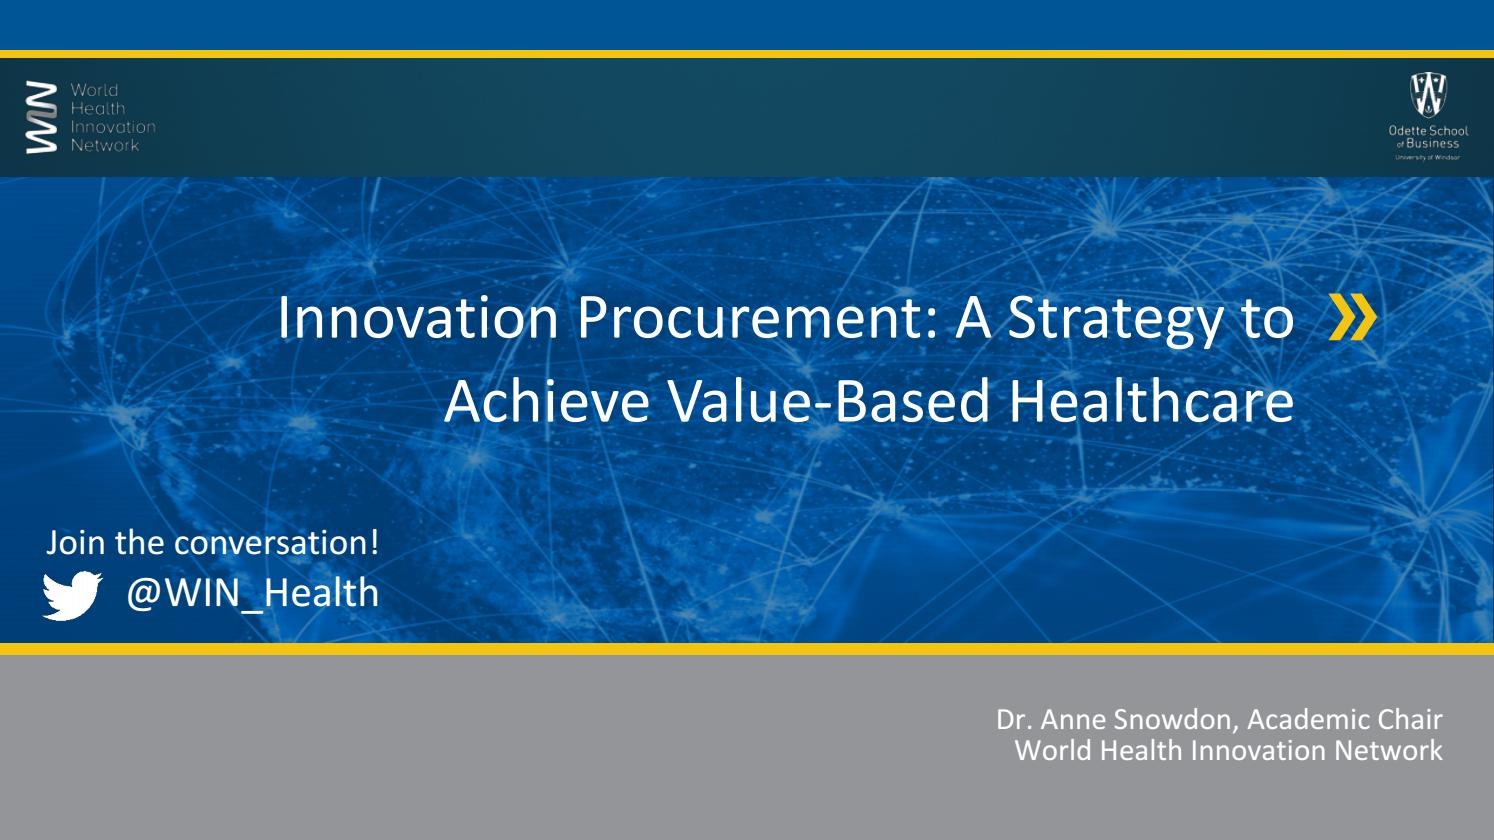 Innovation Procurement: A Strategy to Achieve Value-Based Healthcare